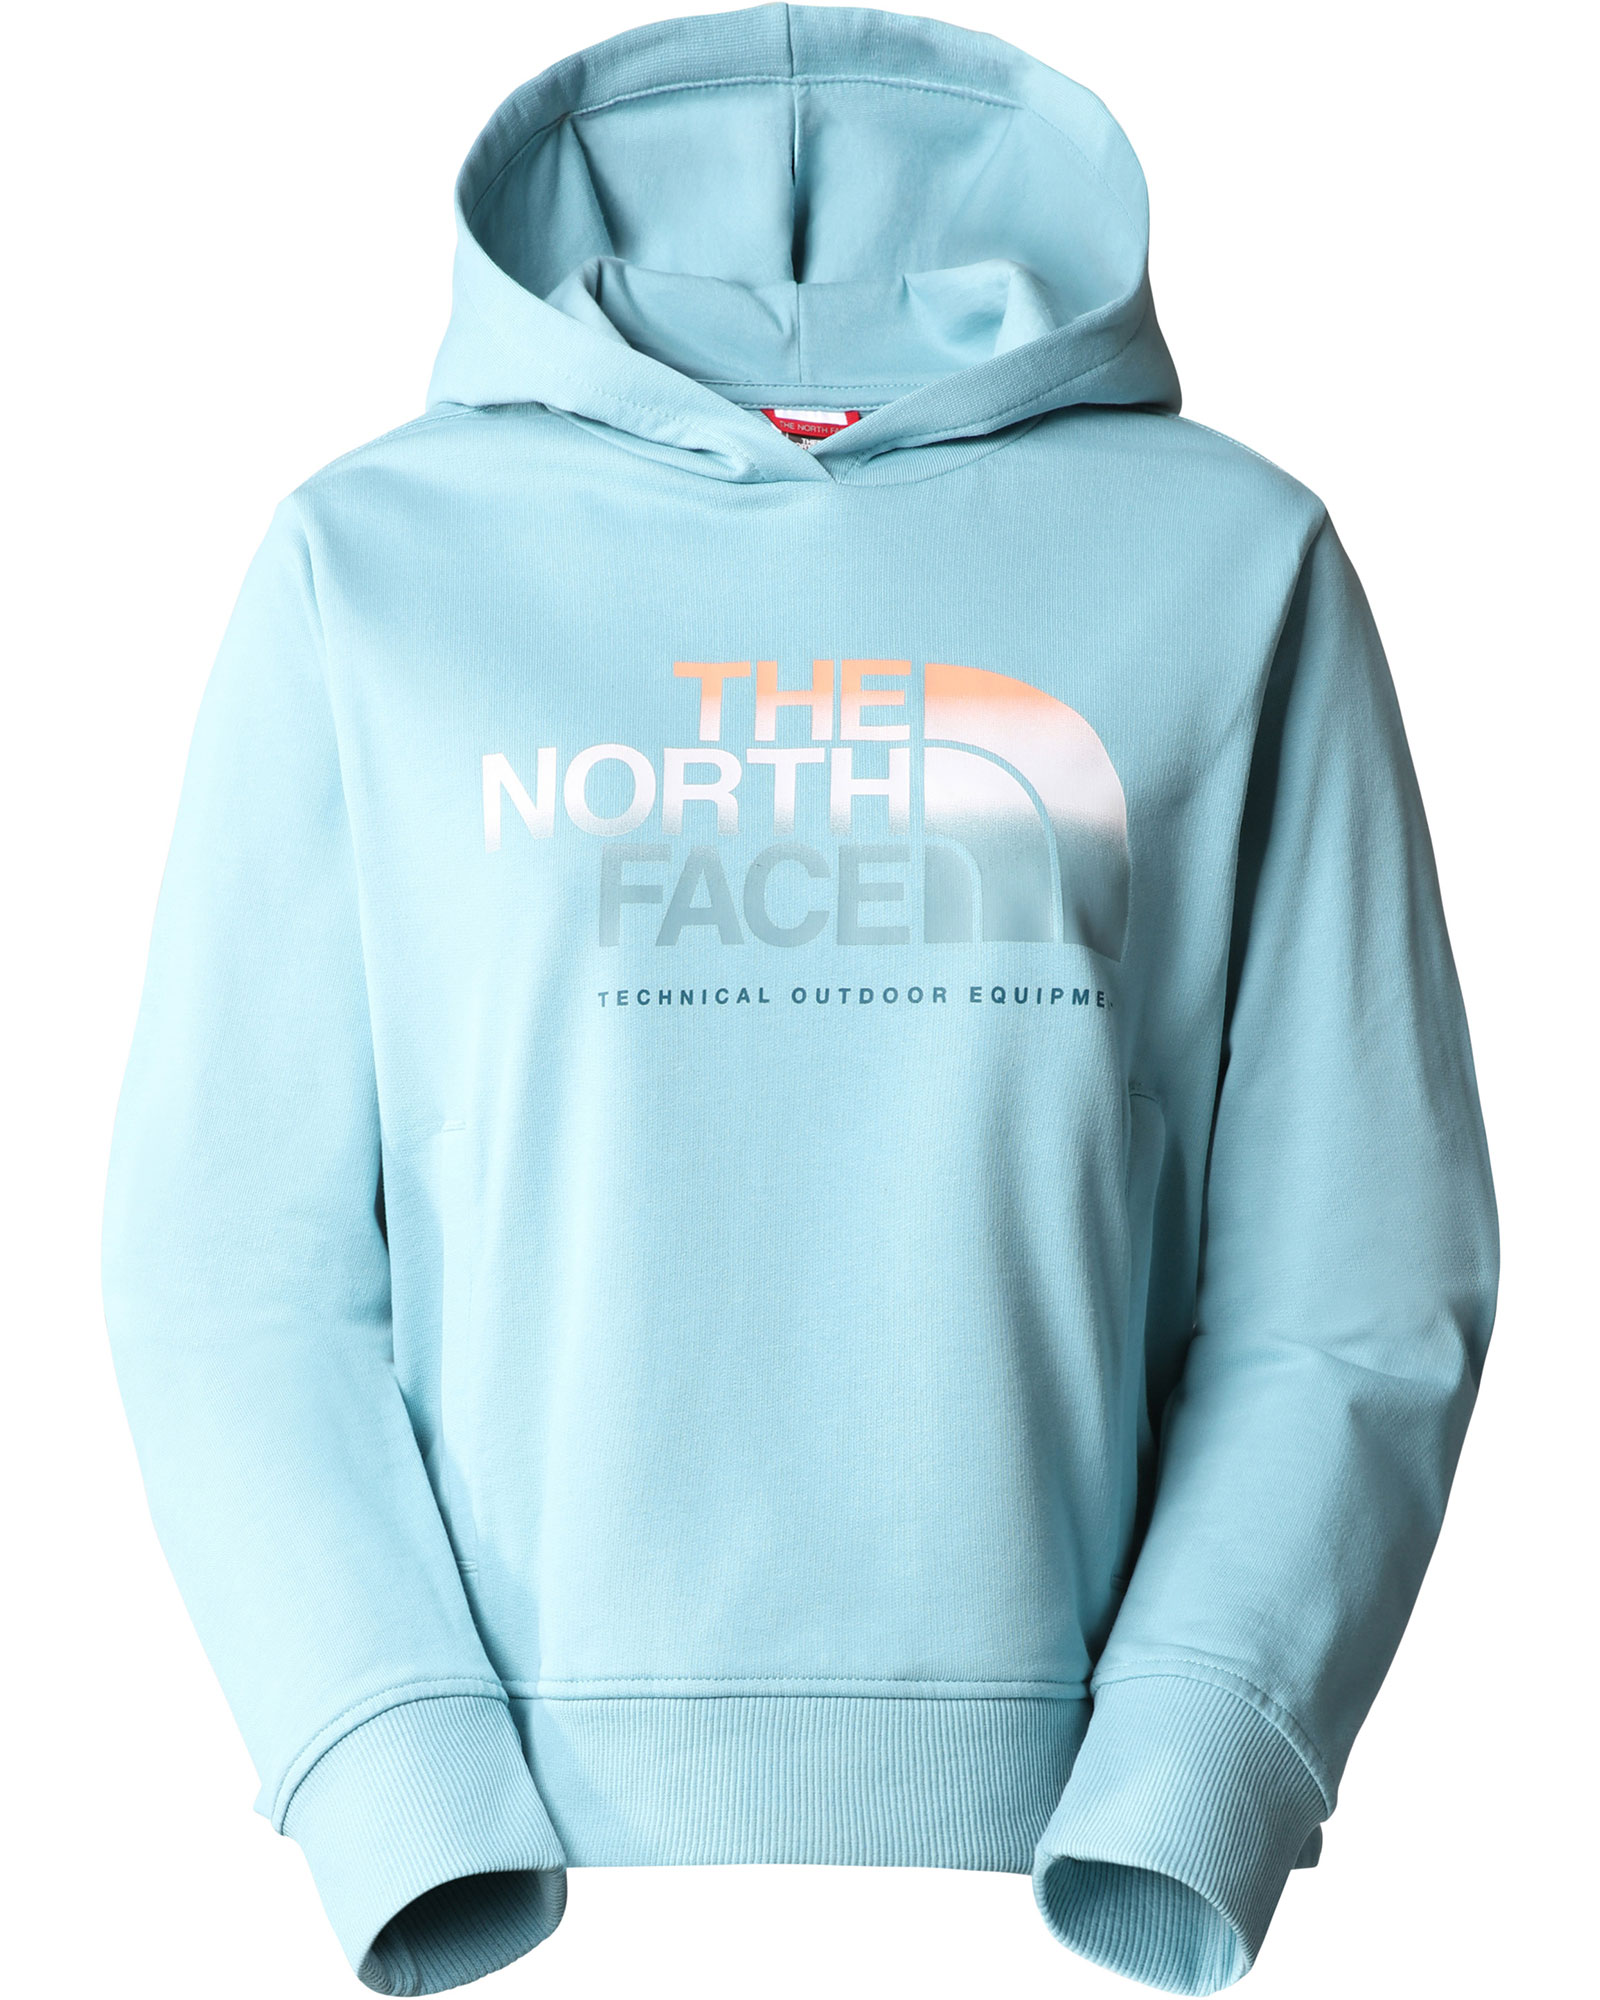 The North Face Women’s D2 Graphic Crop Hoodie - Reef Waters XL